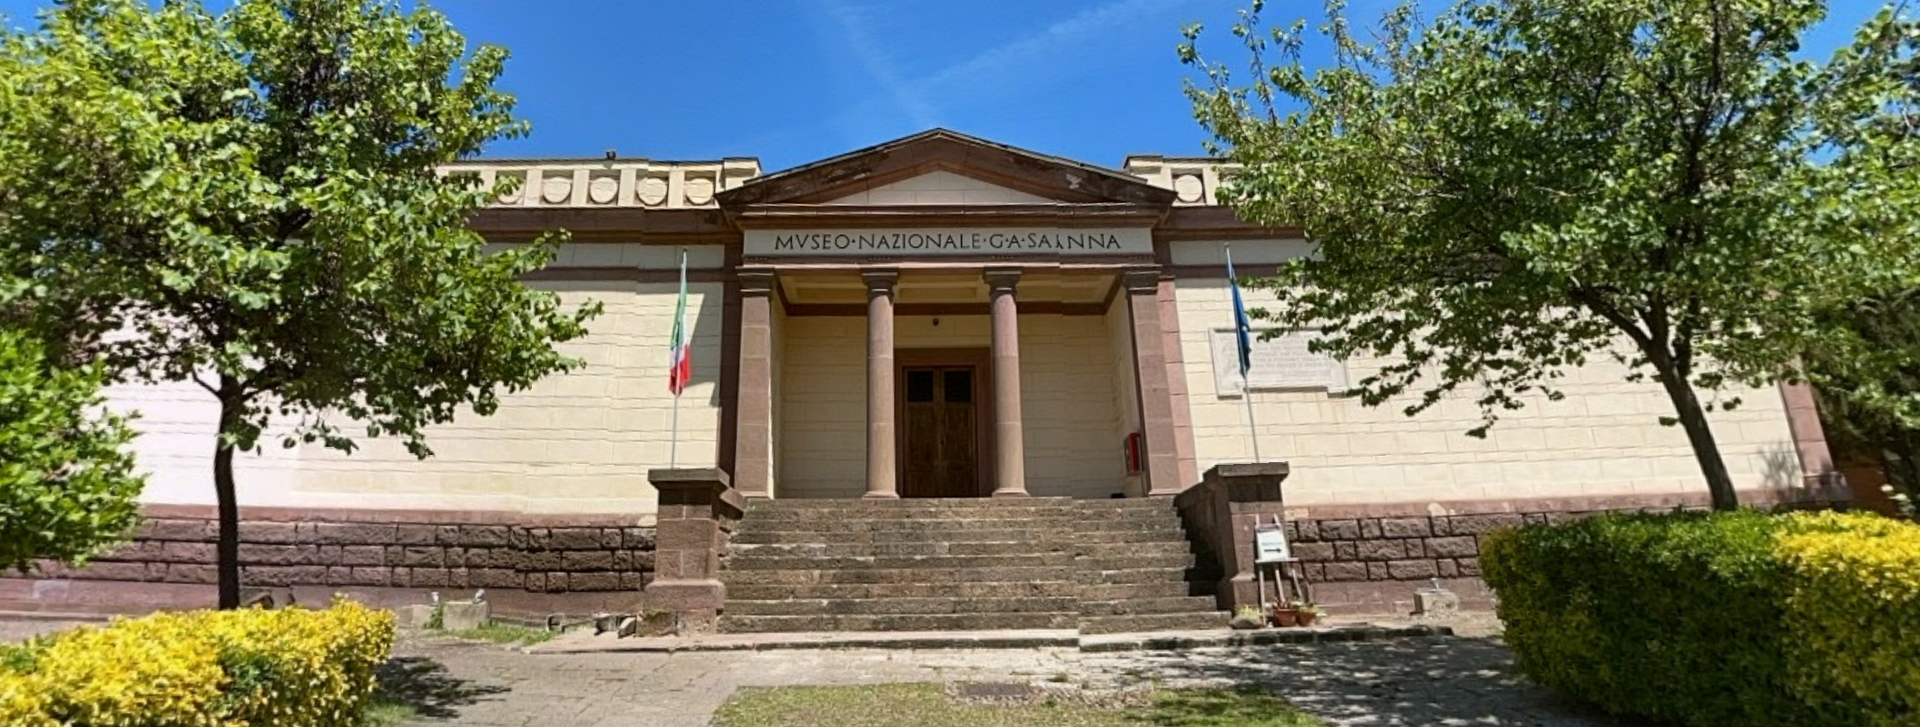 Museo Nazionale Sanna by Google Earth